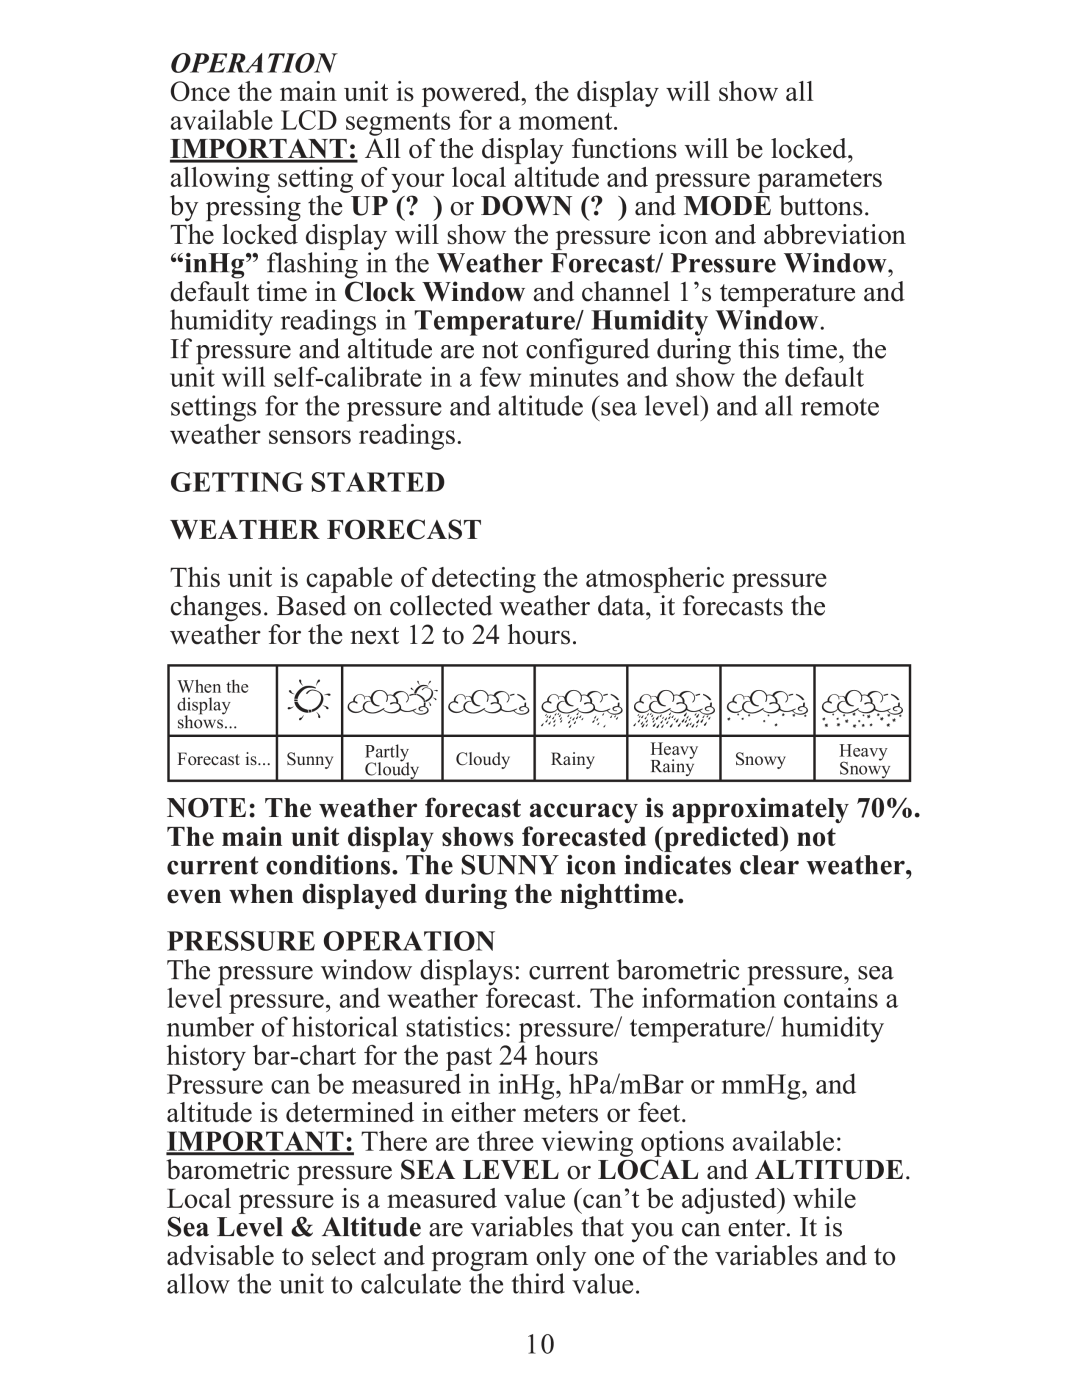 Meade TE688W user manual Getting Started Weather Forecast, Pressure Operation 